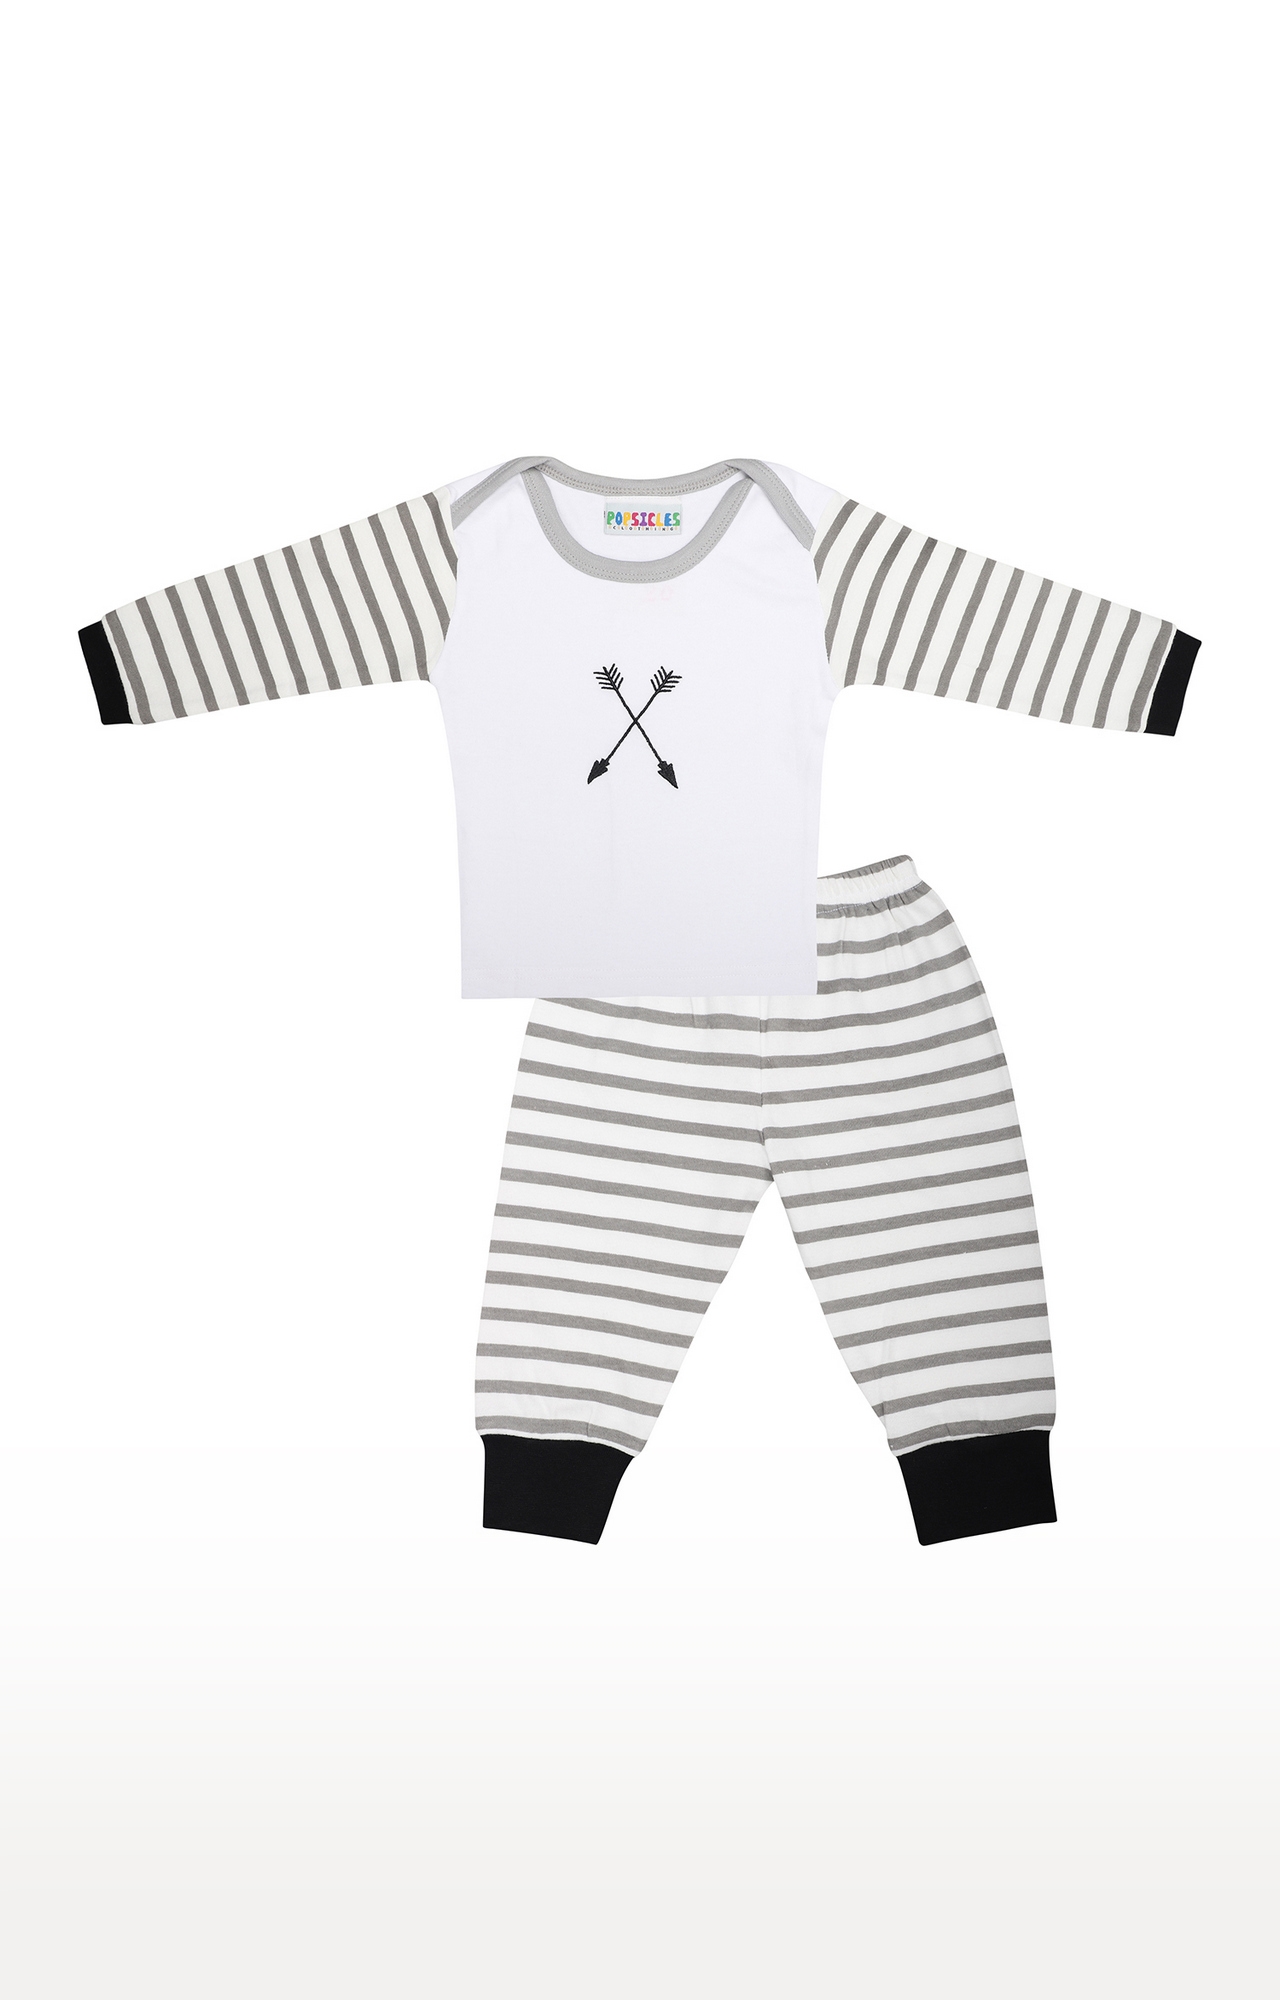 Popsicles Clothing | Popsicles Soft Cotton Comfort fit Round Neck Long Sleeves T-shirt and Pants Set for Boys - Off White (0-3M)